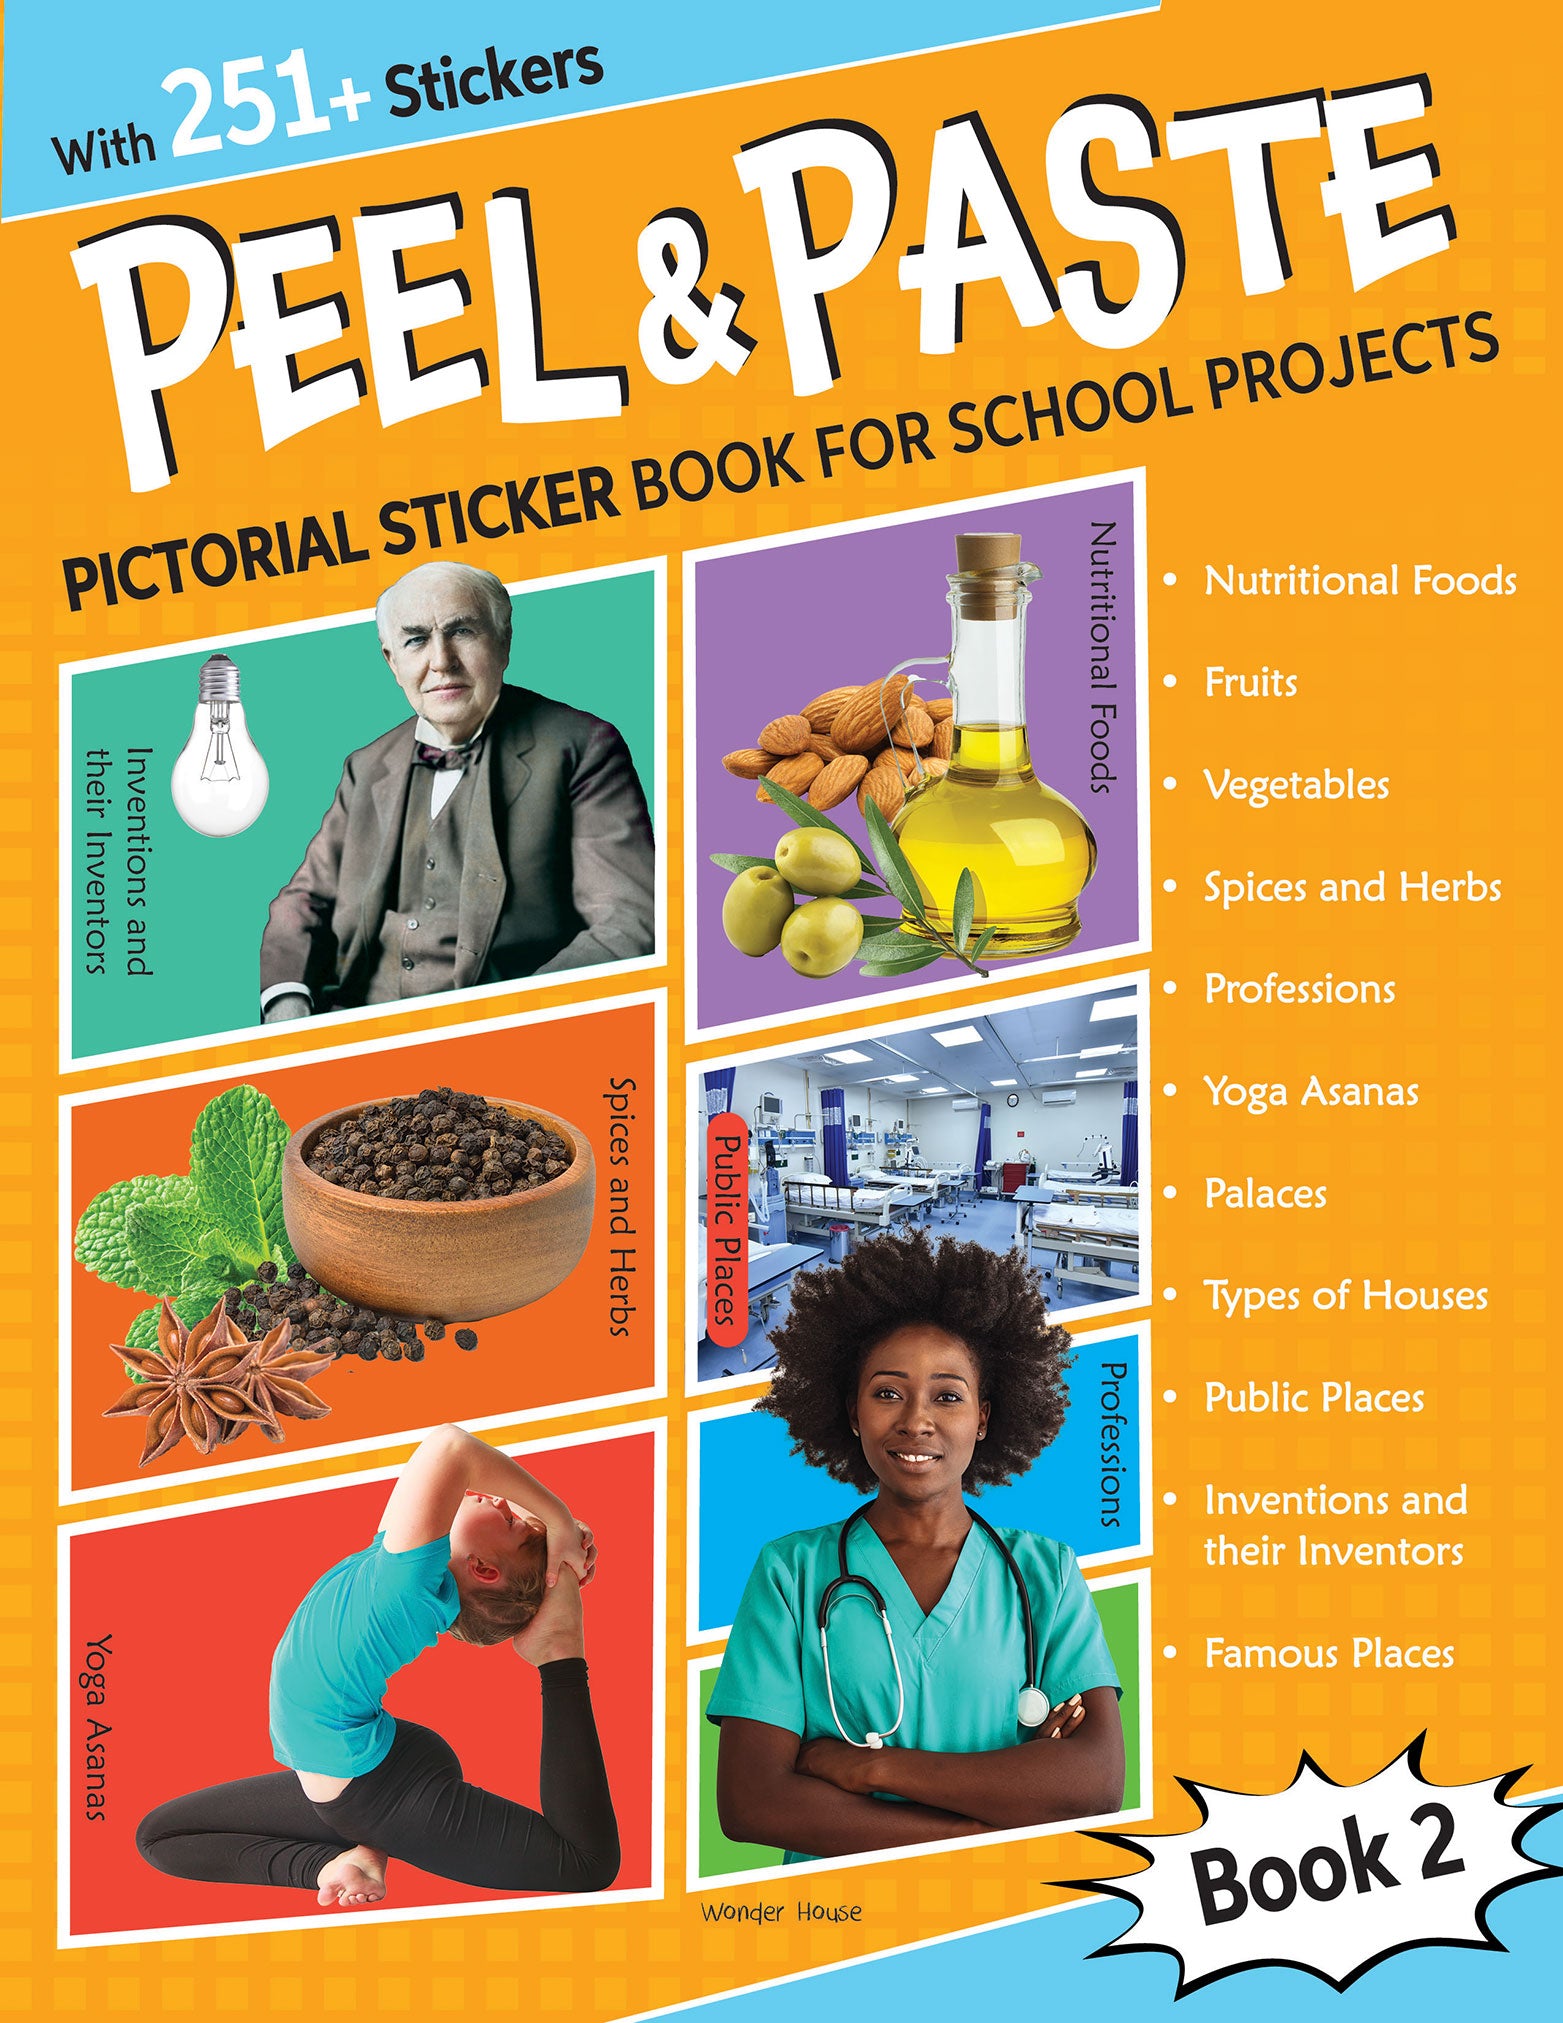 Peel & Paste - Pictorial Sticker Book For School Projects - Book 2